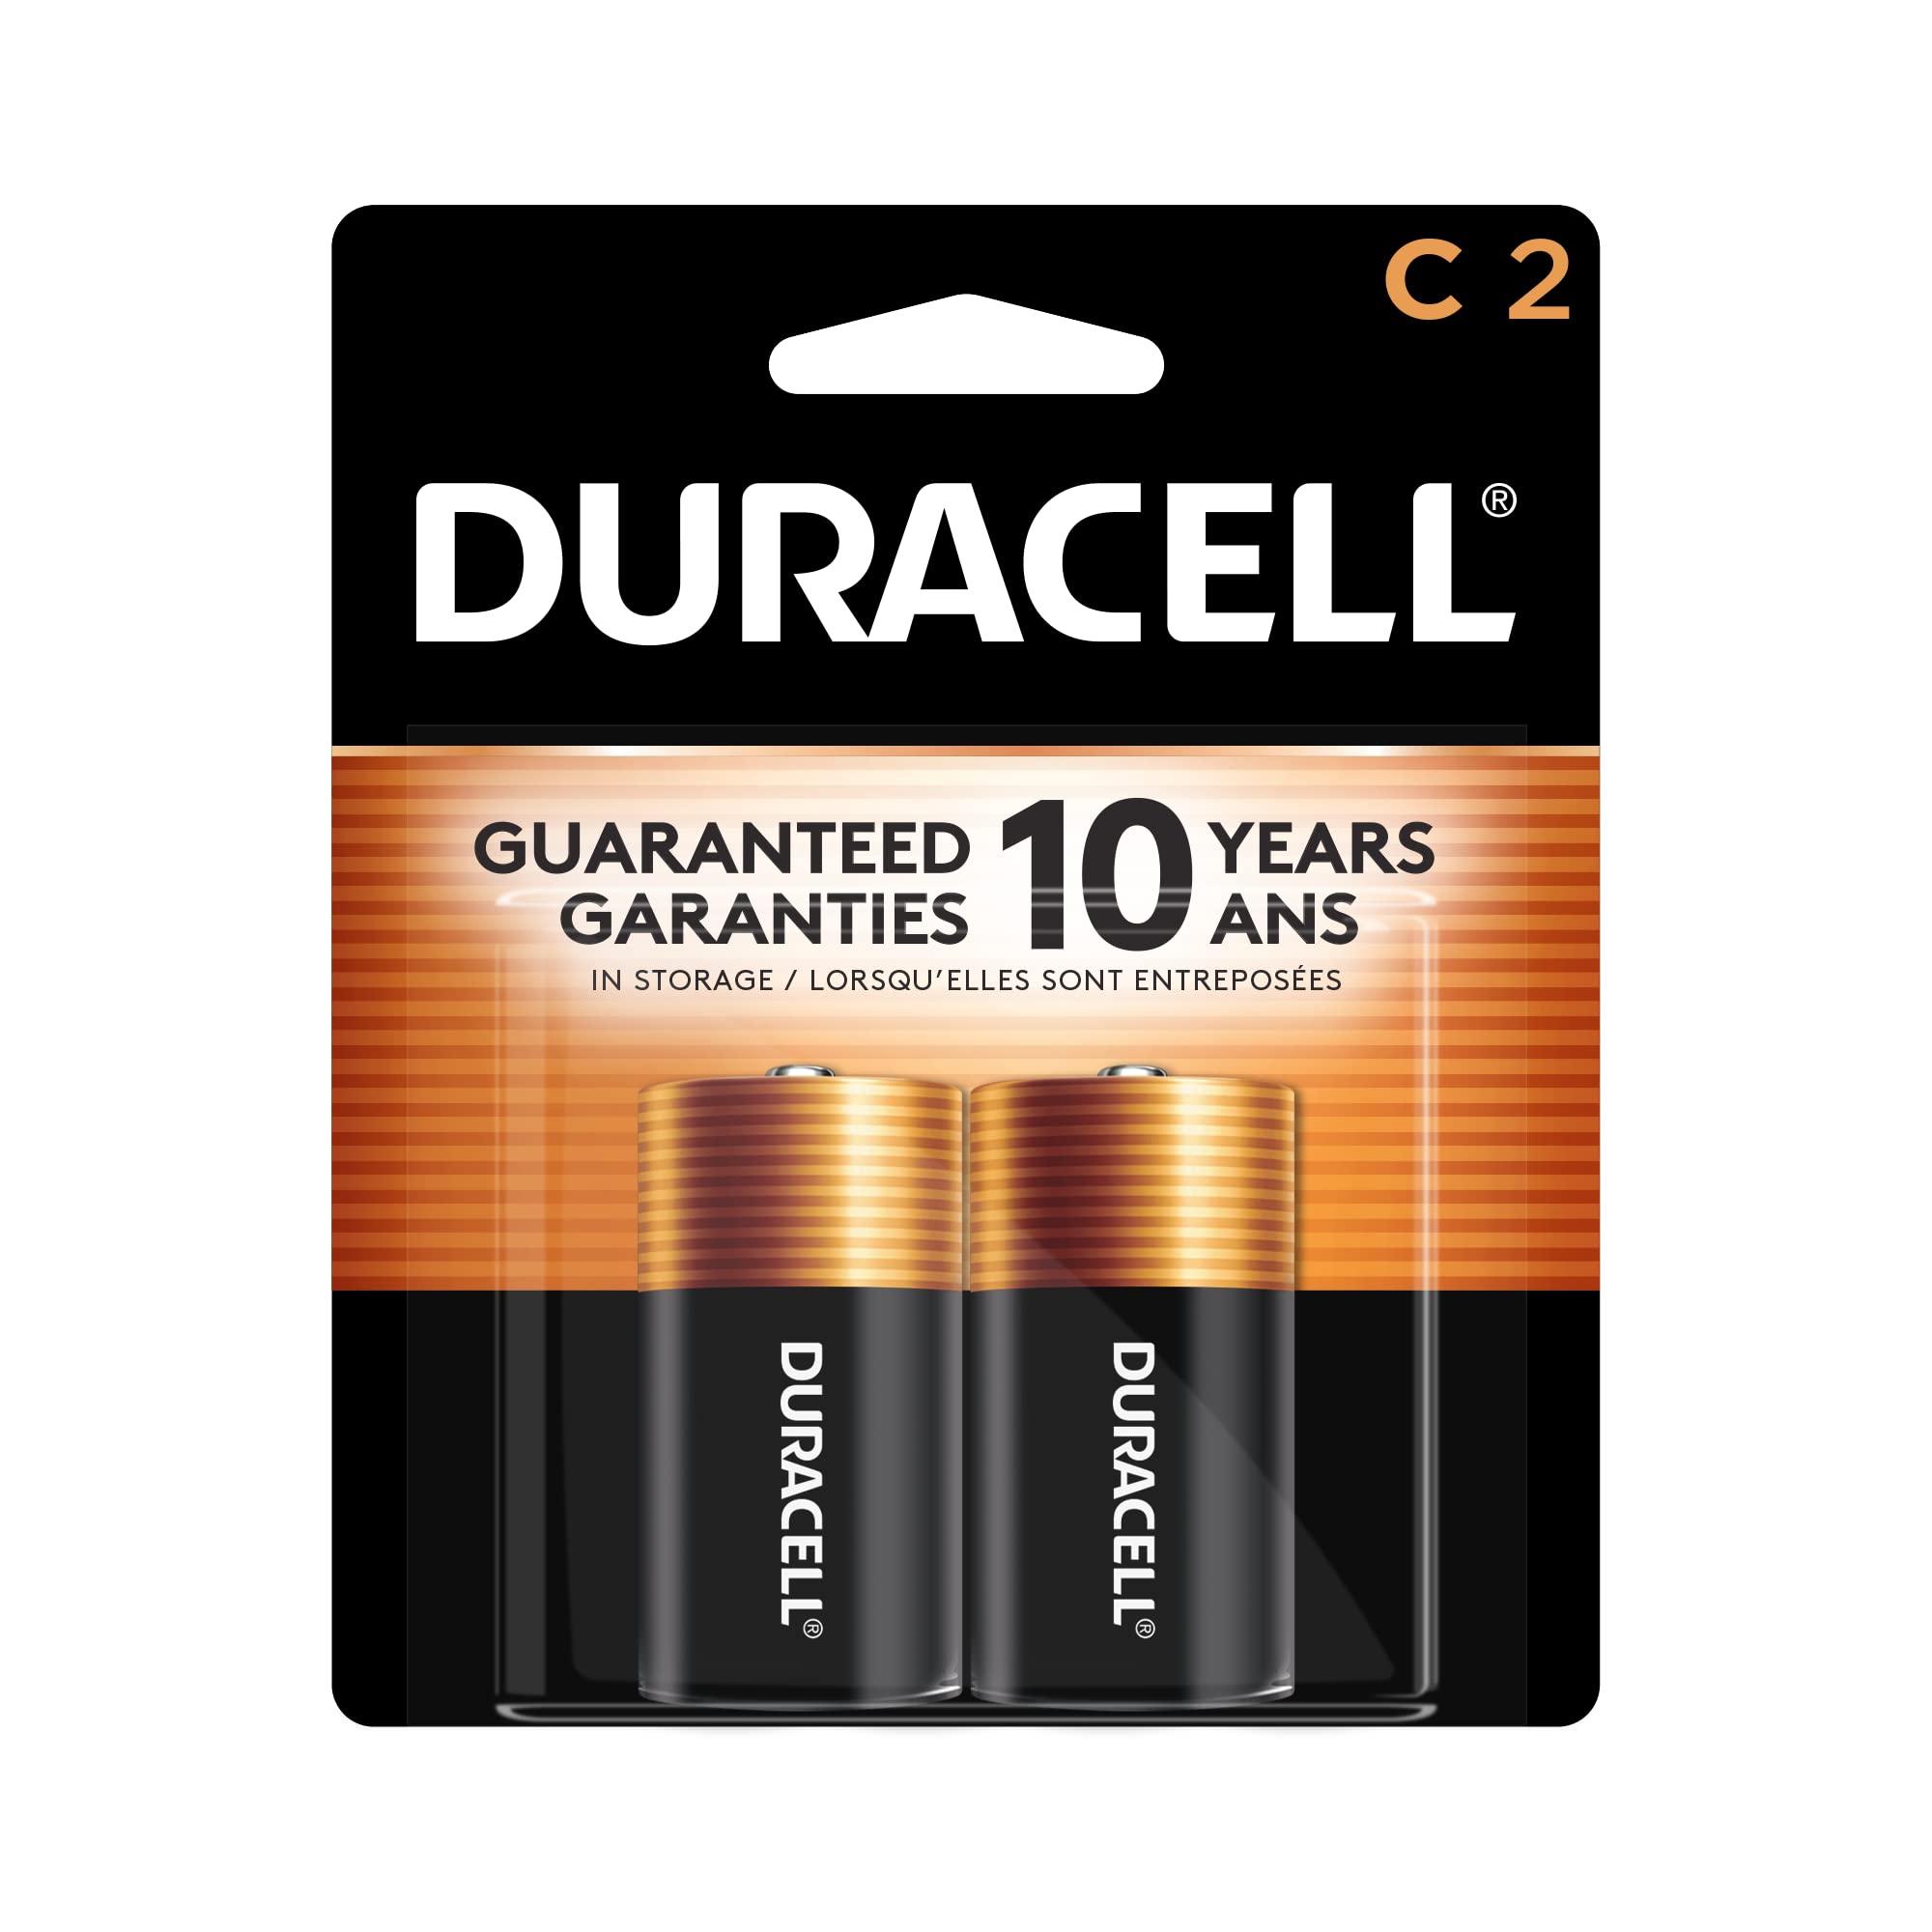 DURACELL Coppertop 1.5V Size C Alkaline Battery, (Pack of 48) - image 1 of 5